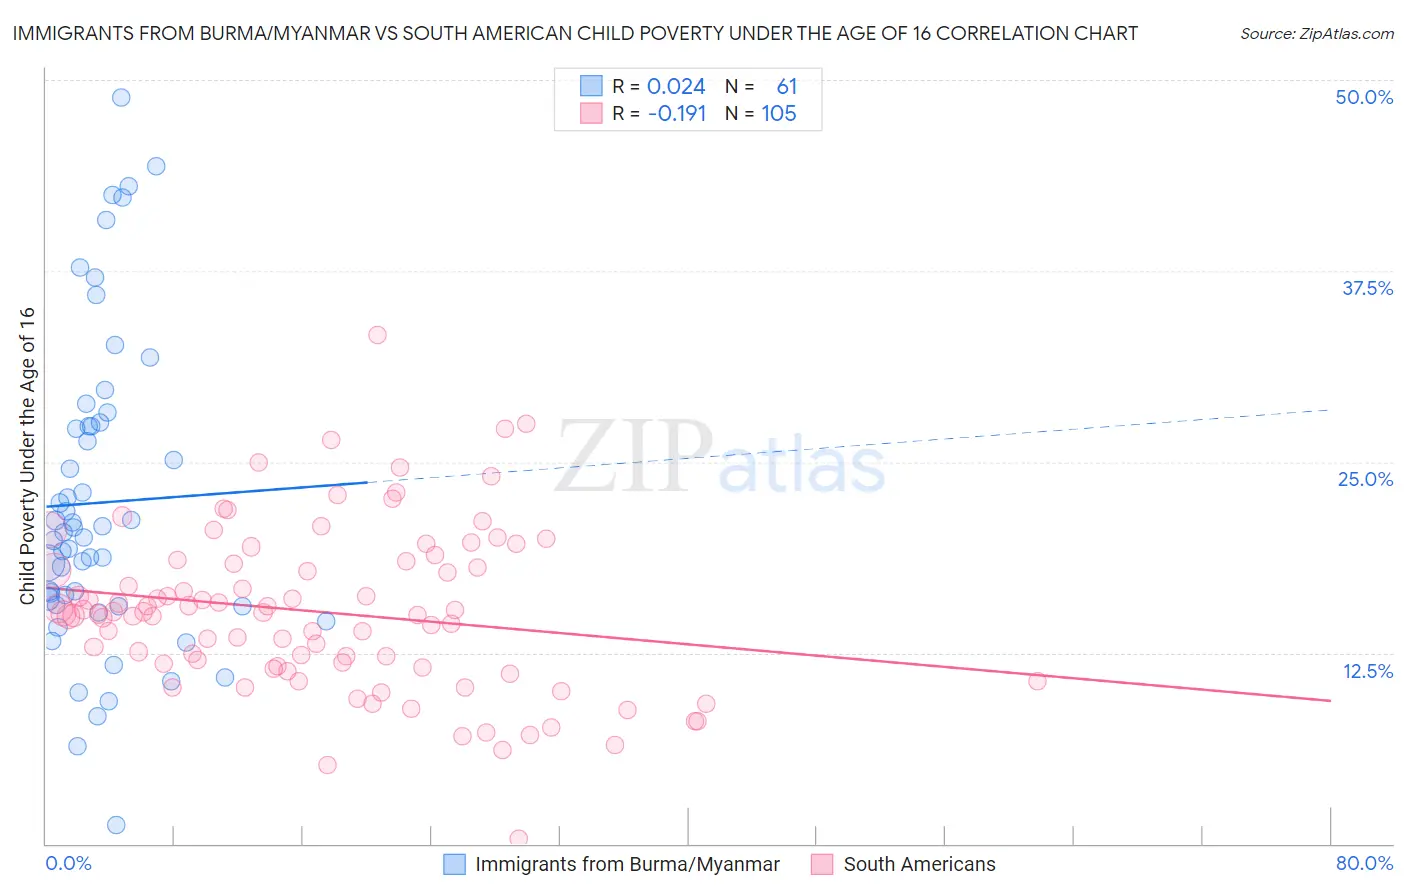 Immigrants from Burma/Myanmar vs South American Child Poverty Under the Age of 16